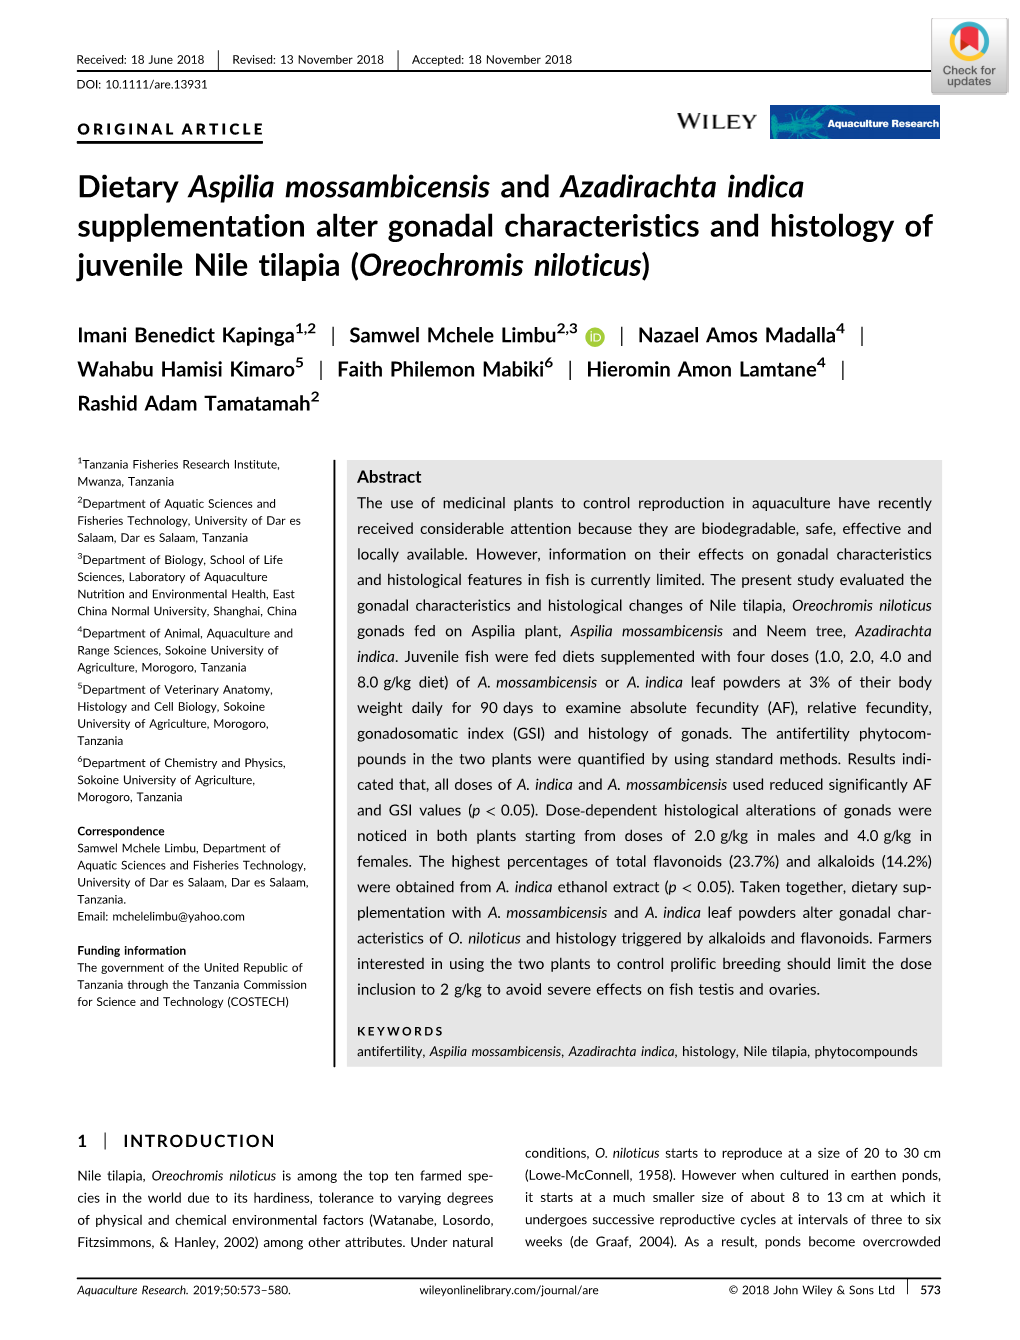 Dietary Aspilia Mossambicensis and Azadirachta Indica Supplementation Alter Gonadal Characteristics and Histology of Juvenile Nile Tilapia (Oreochromis Niloticus)